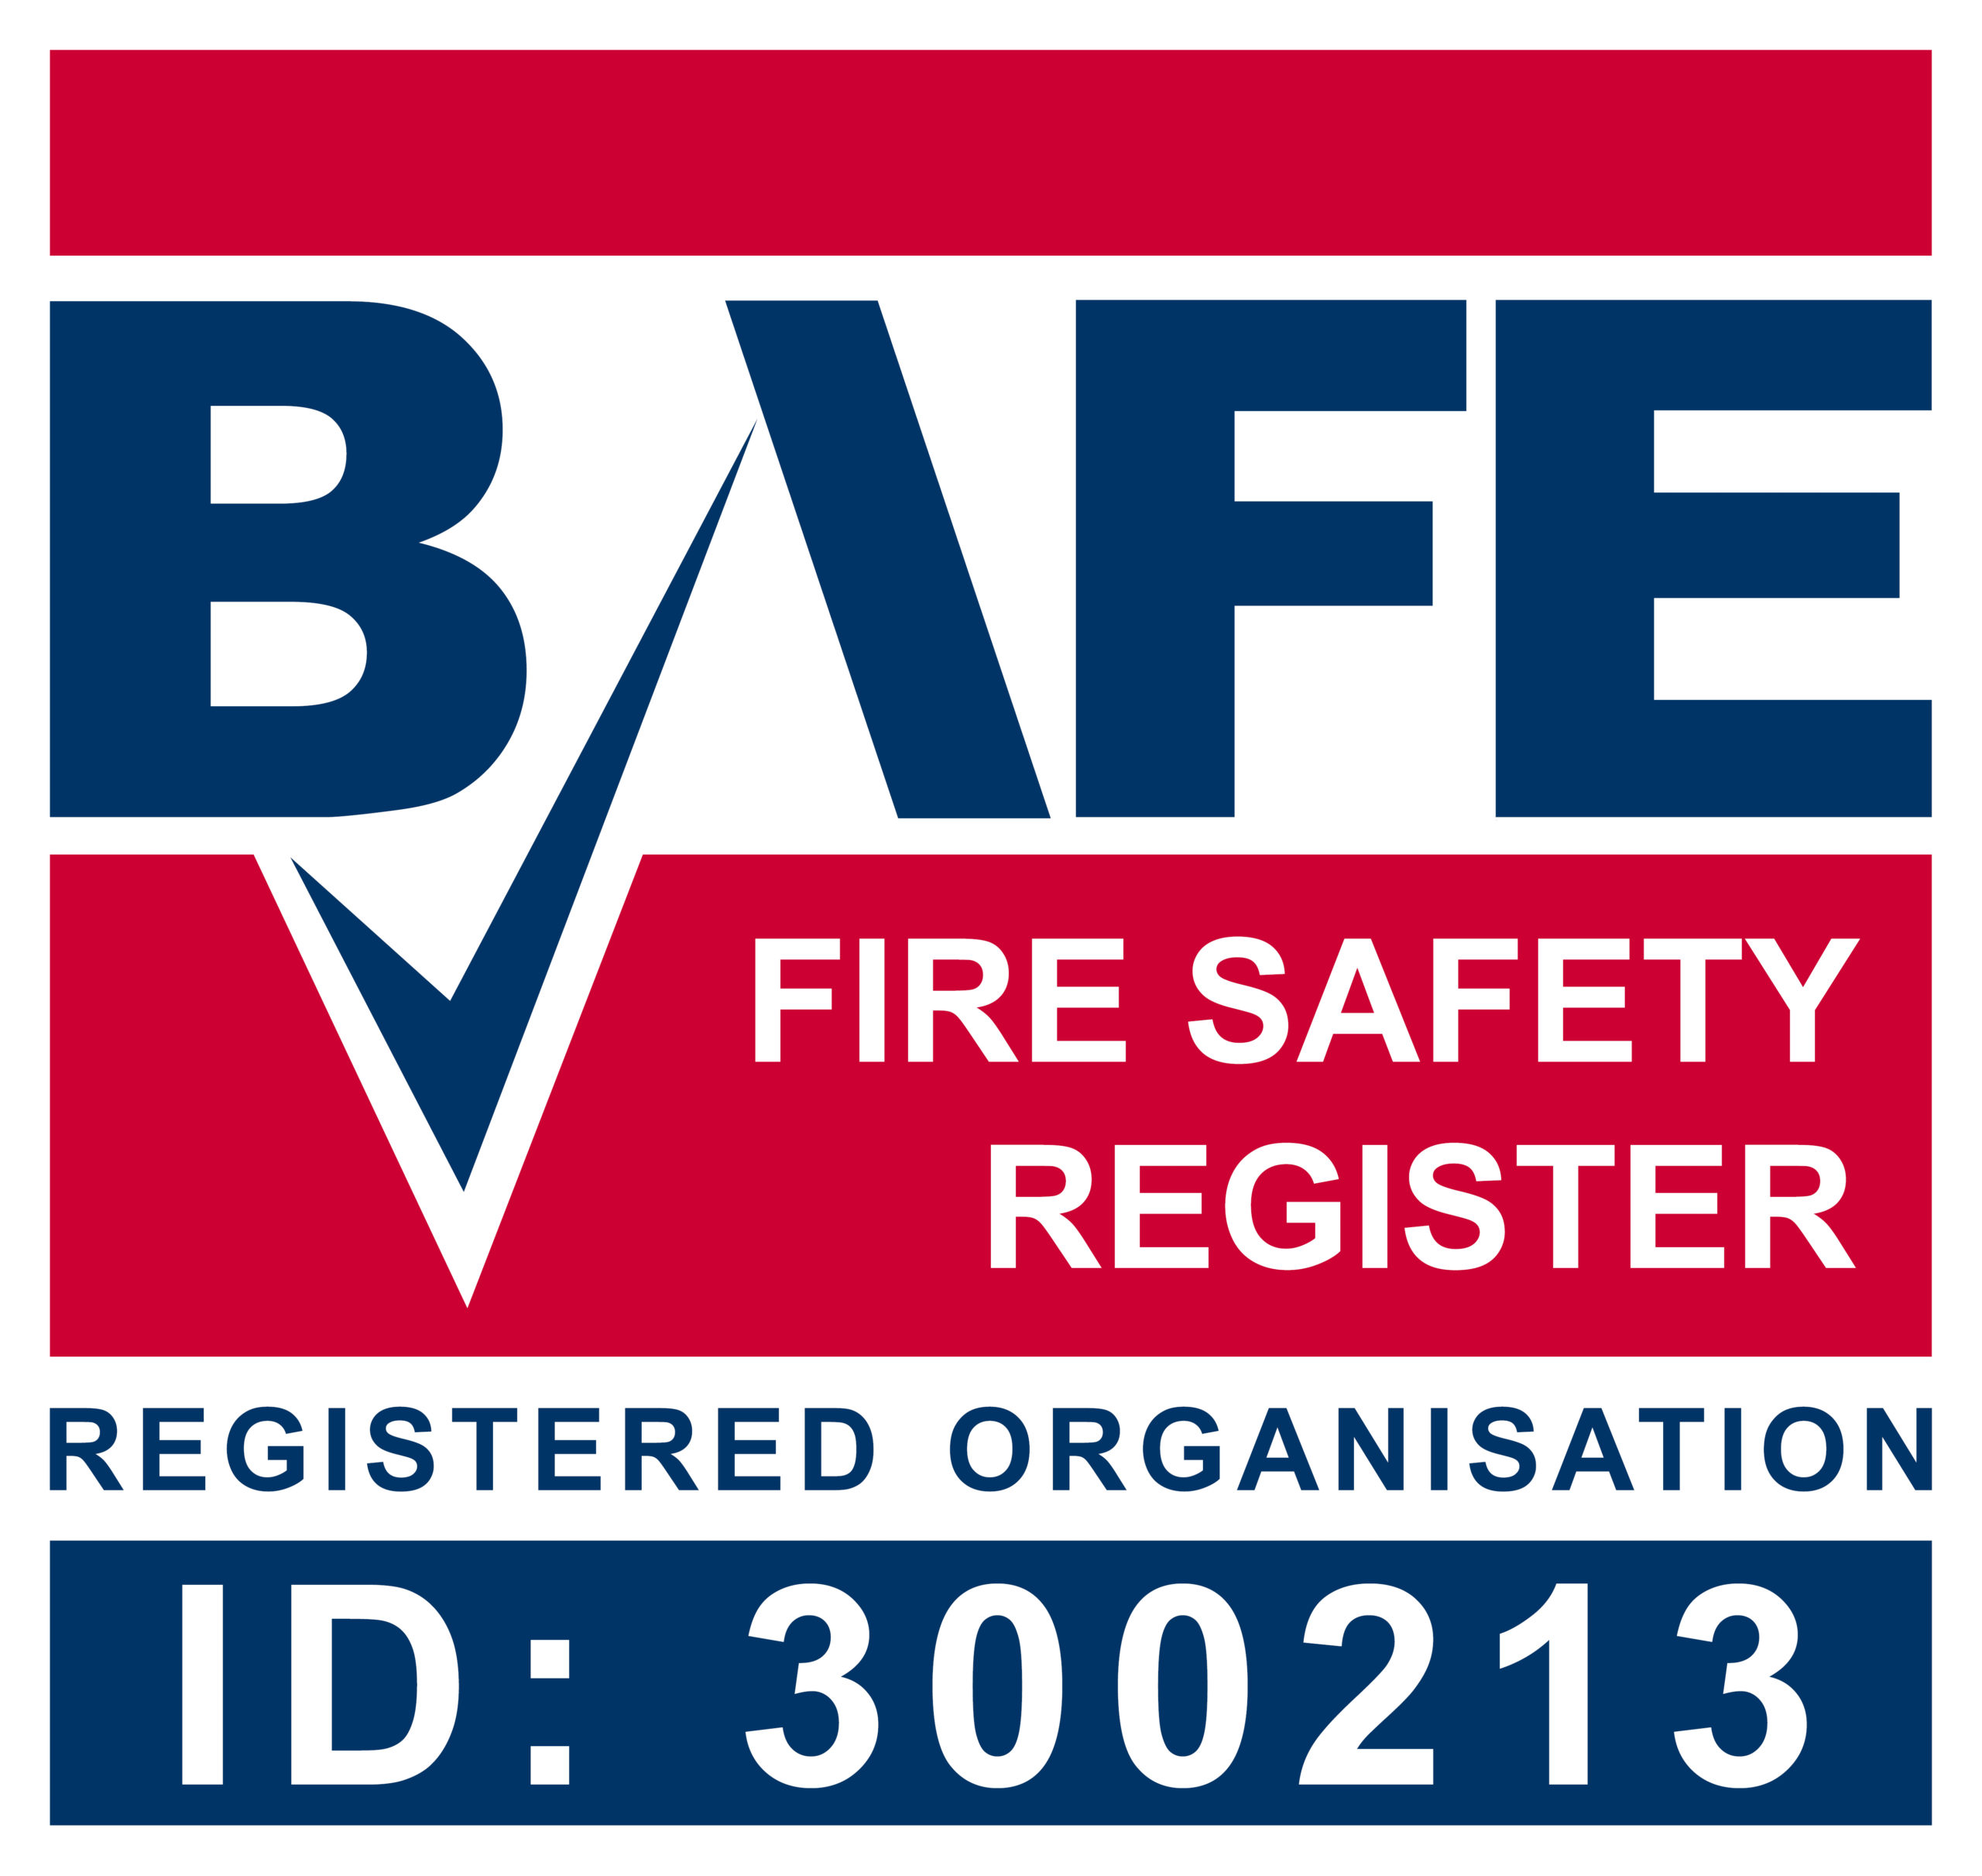 BAFE Fire Safety Register accredited